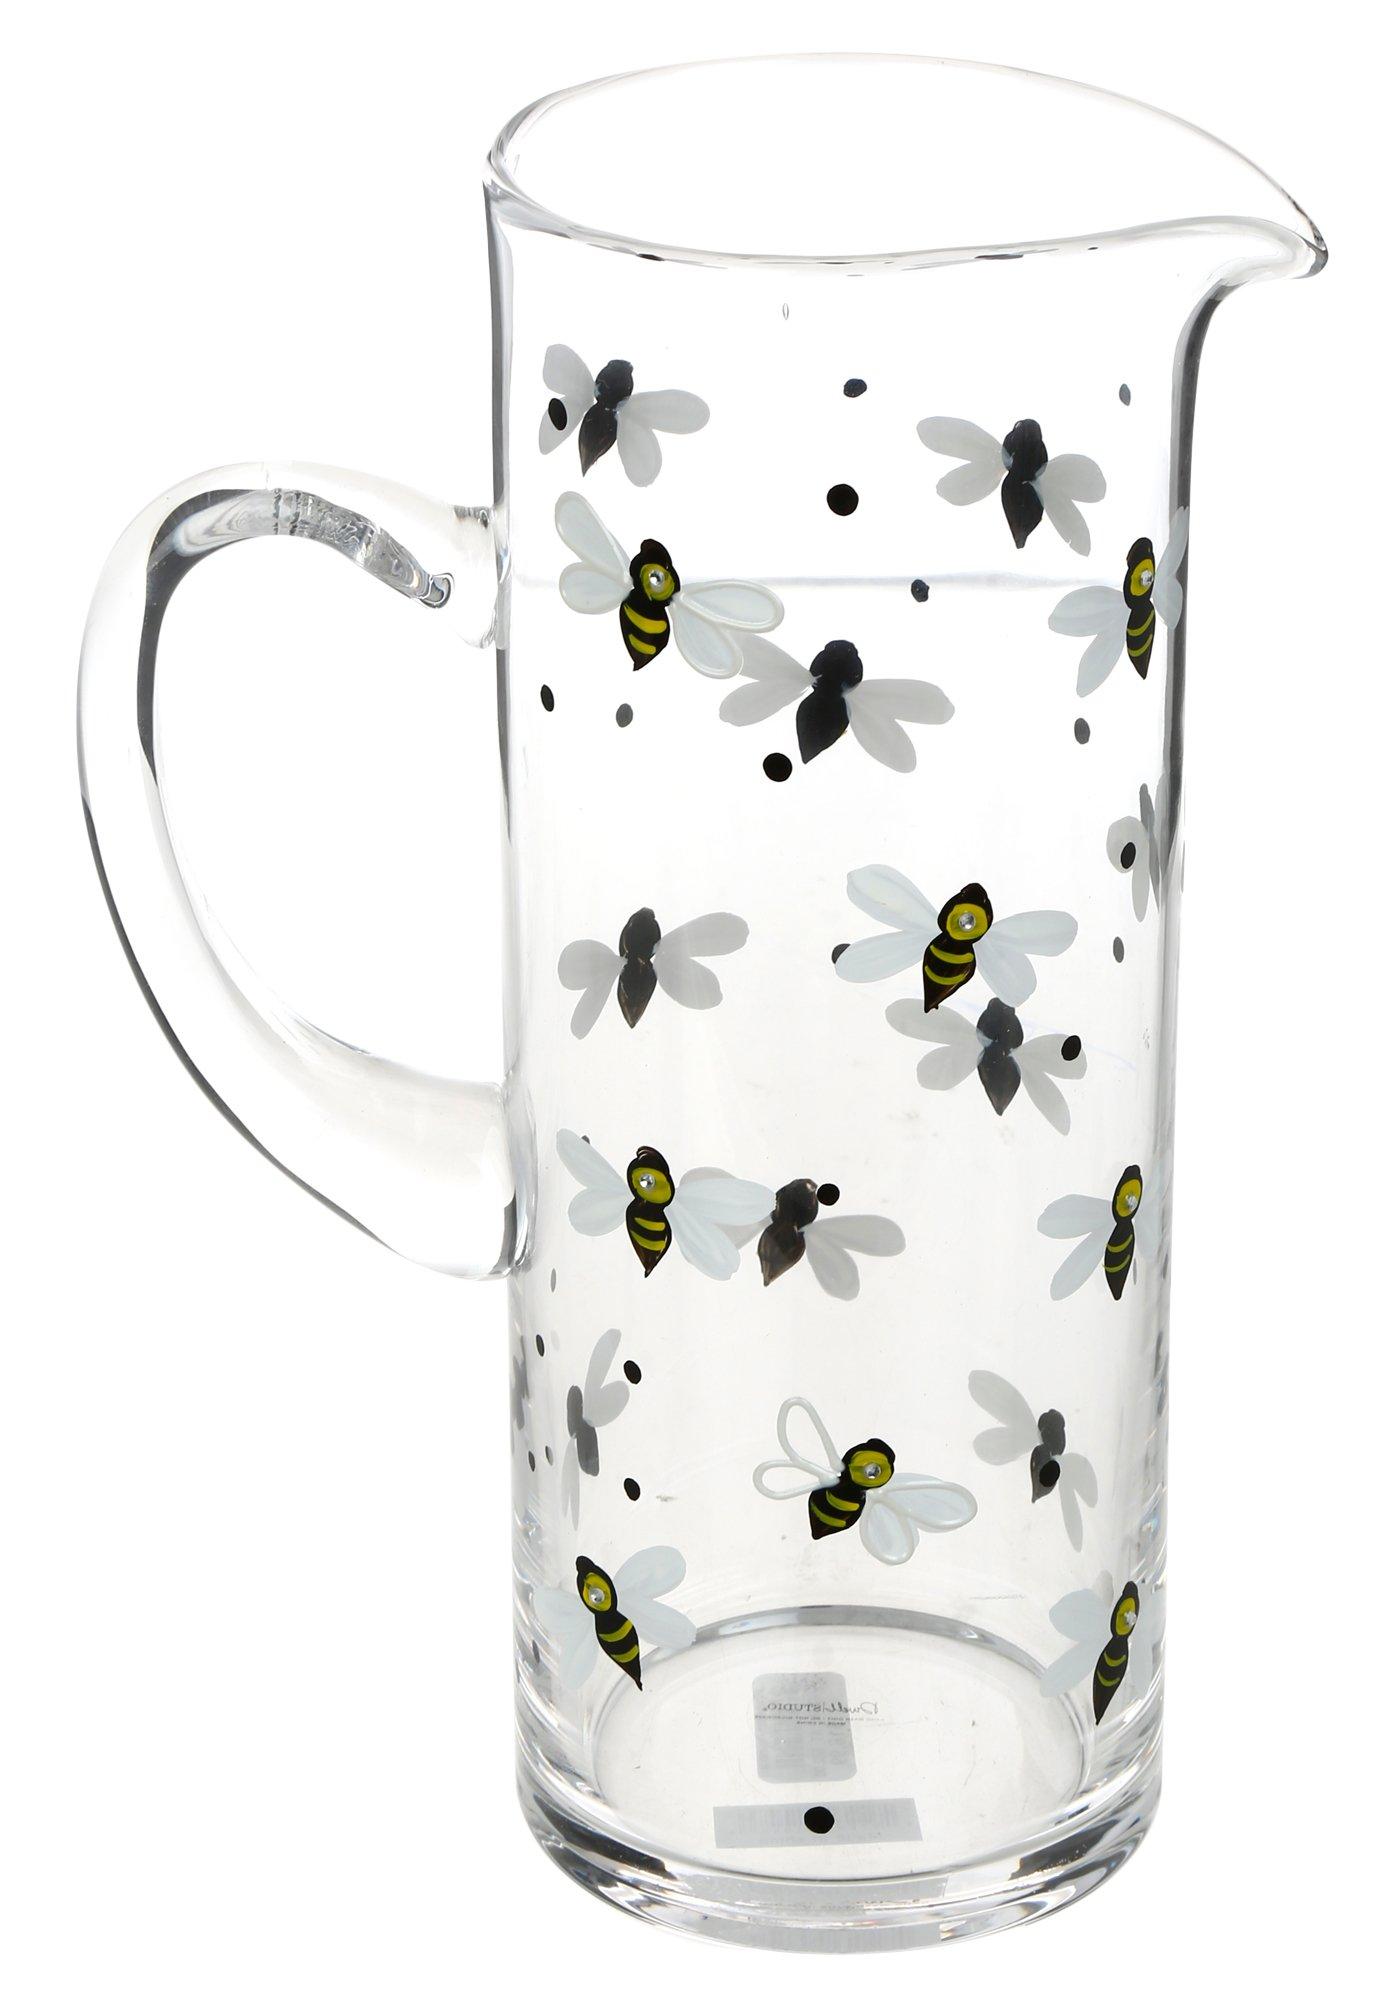 11 in. Bumblebee Handpainted Glass Drink Pitcher